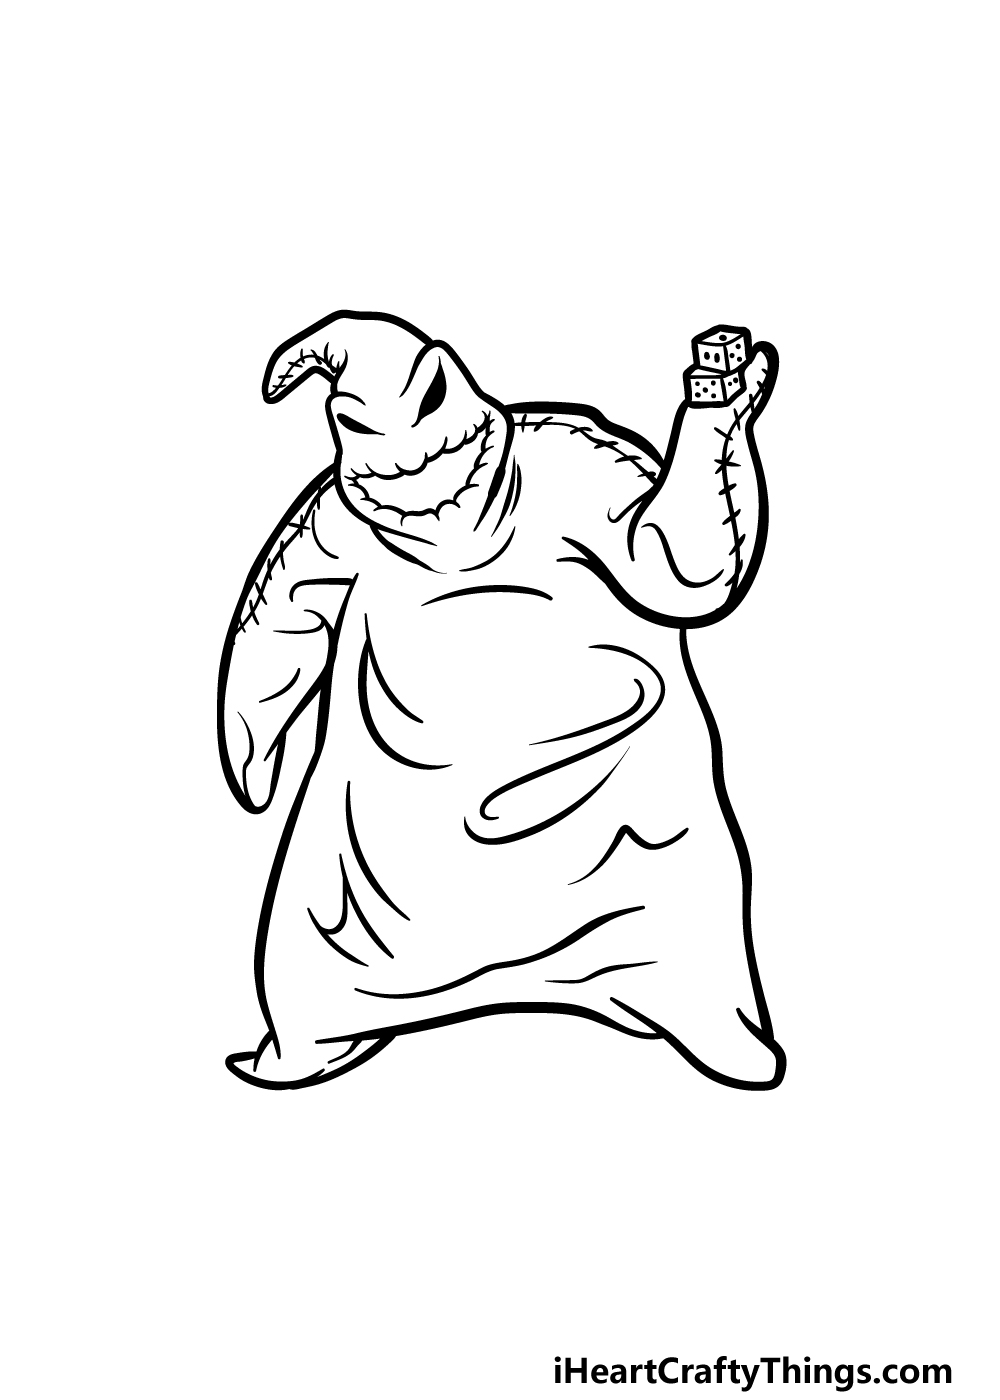 Oogie Boogie Drawing - How To Draw Oogie Boogie Step By Step